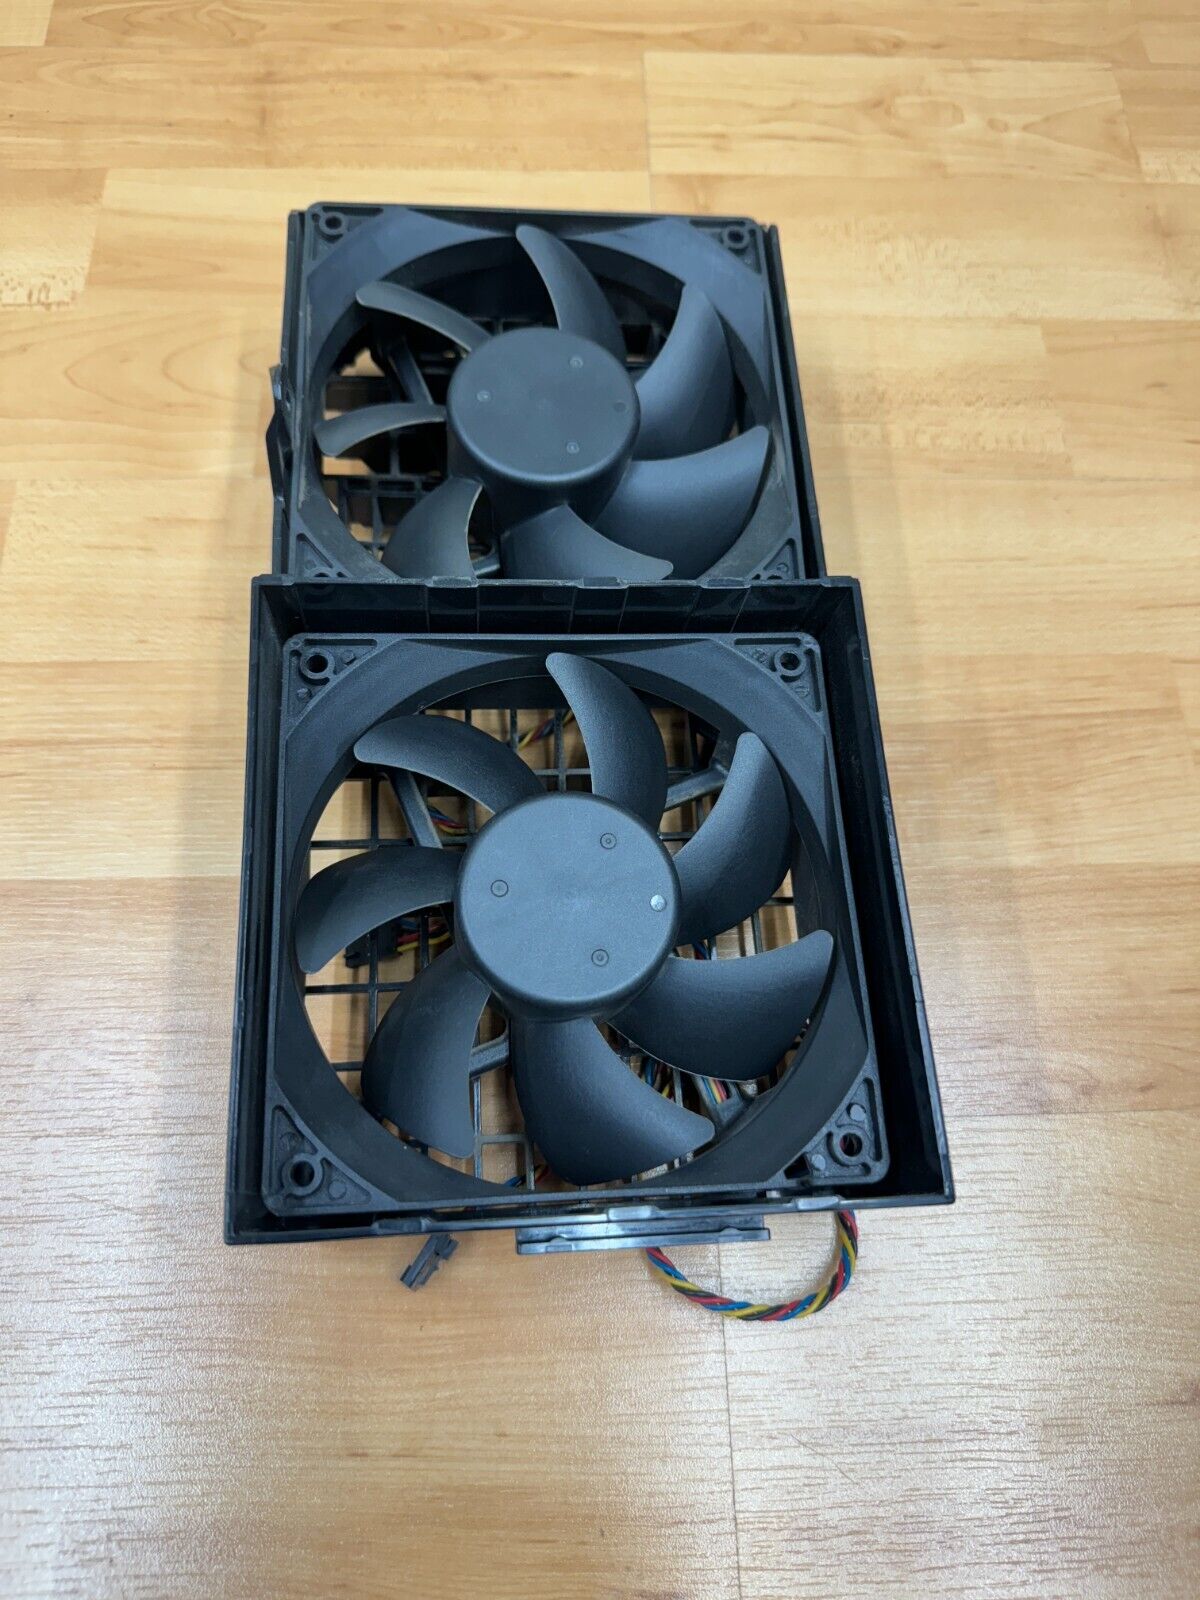 DELL HW856 Precision T3500 T5500 Workstation Front Cooling Fan Assembly 0HW856